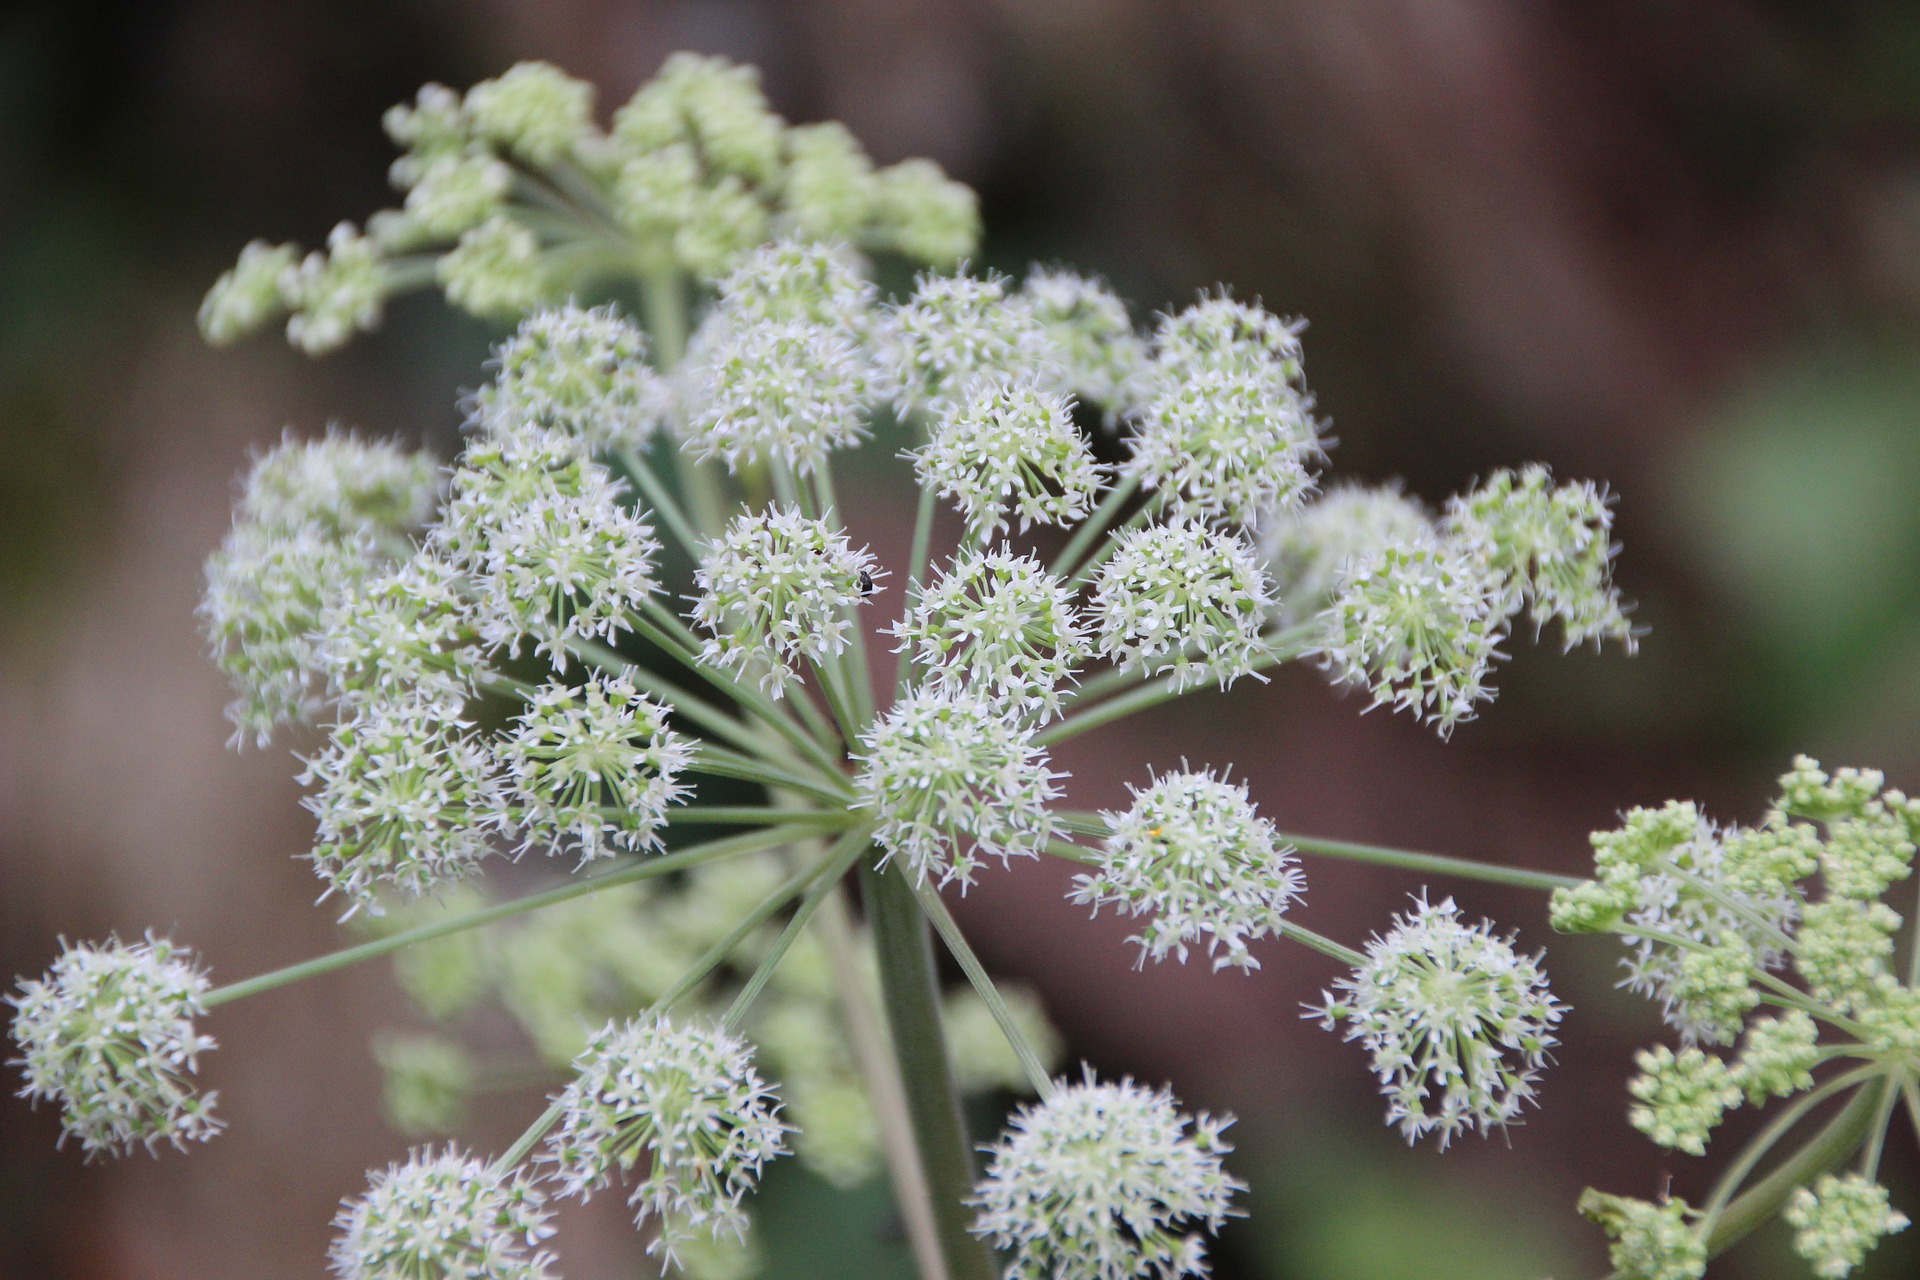 Angelica with small white leaves and several stems